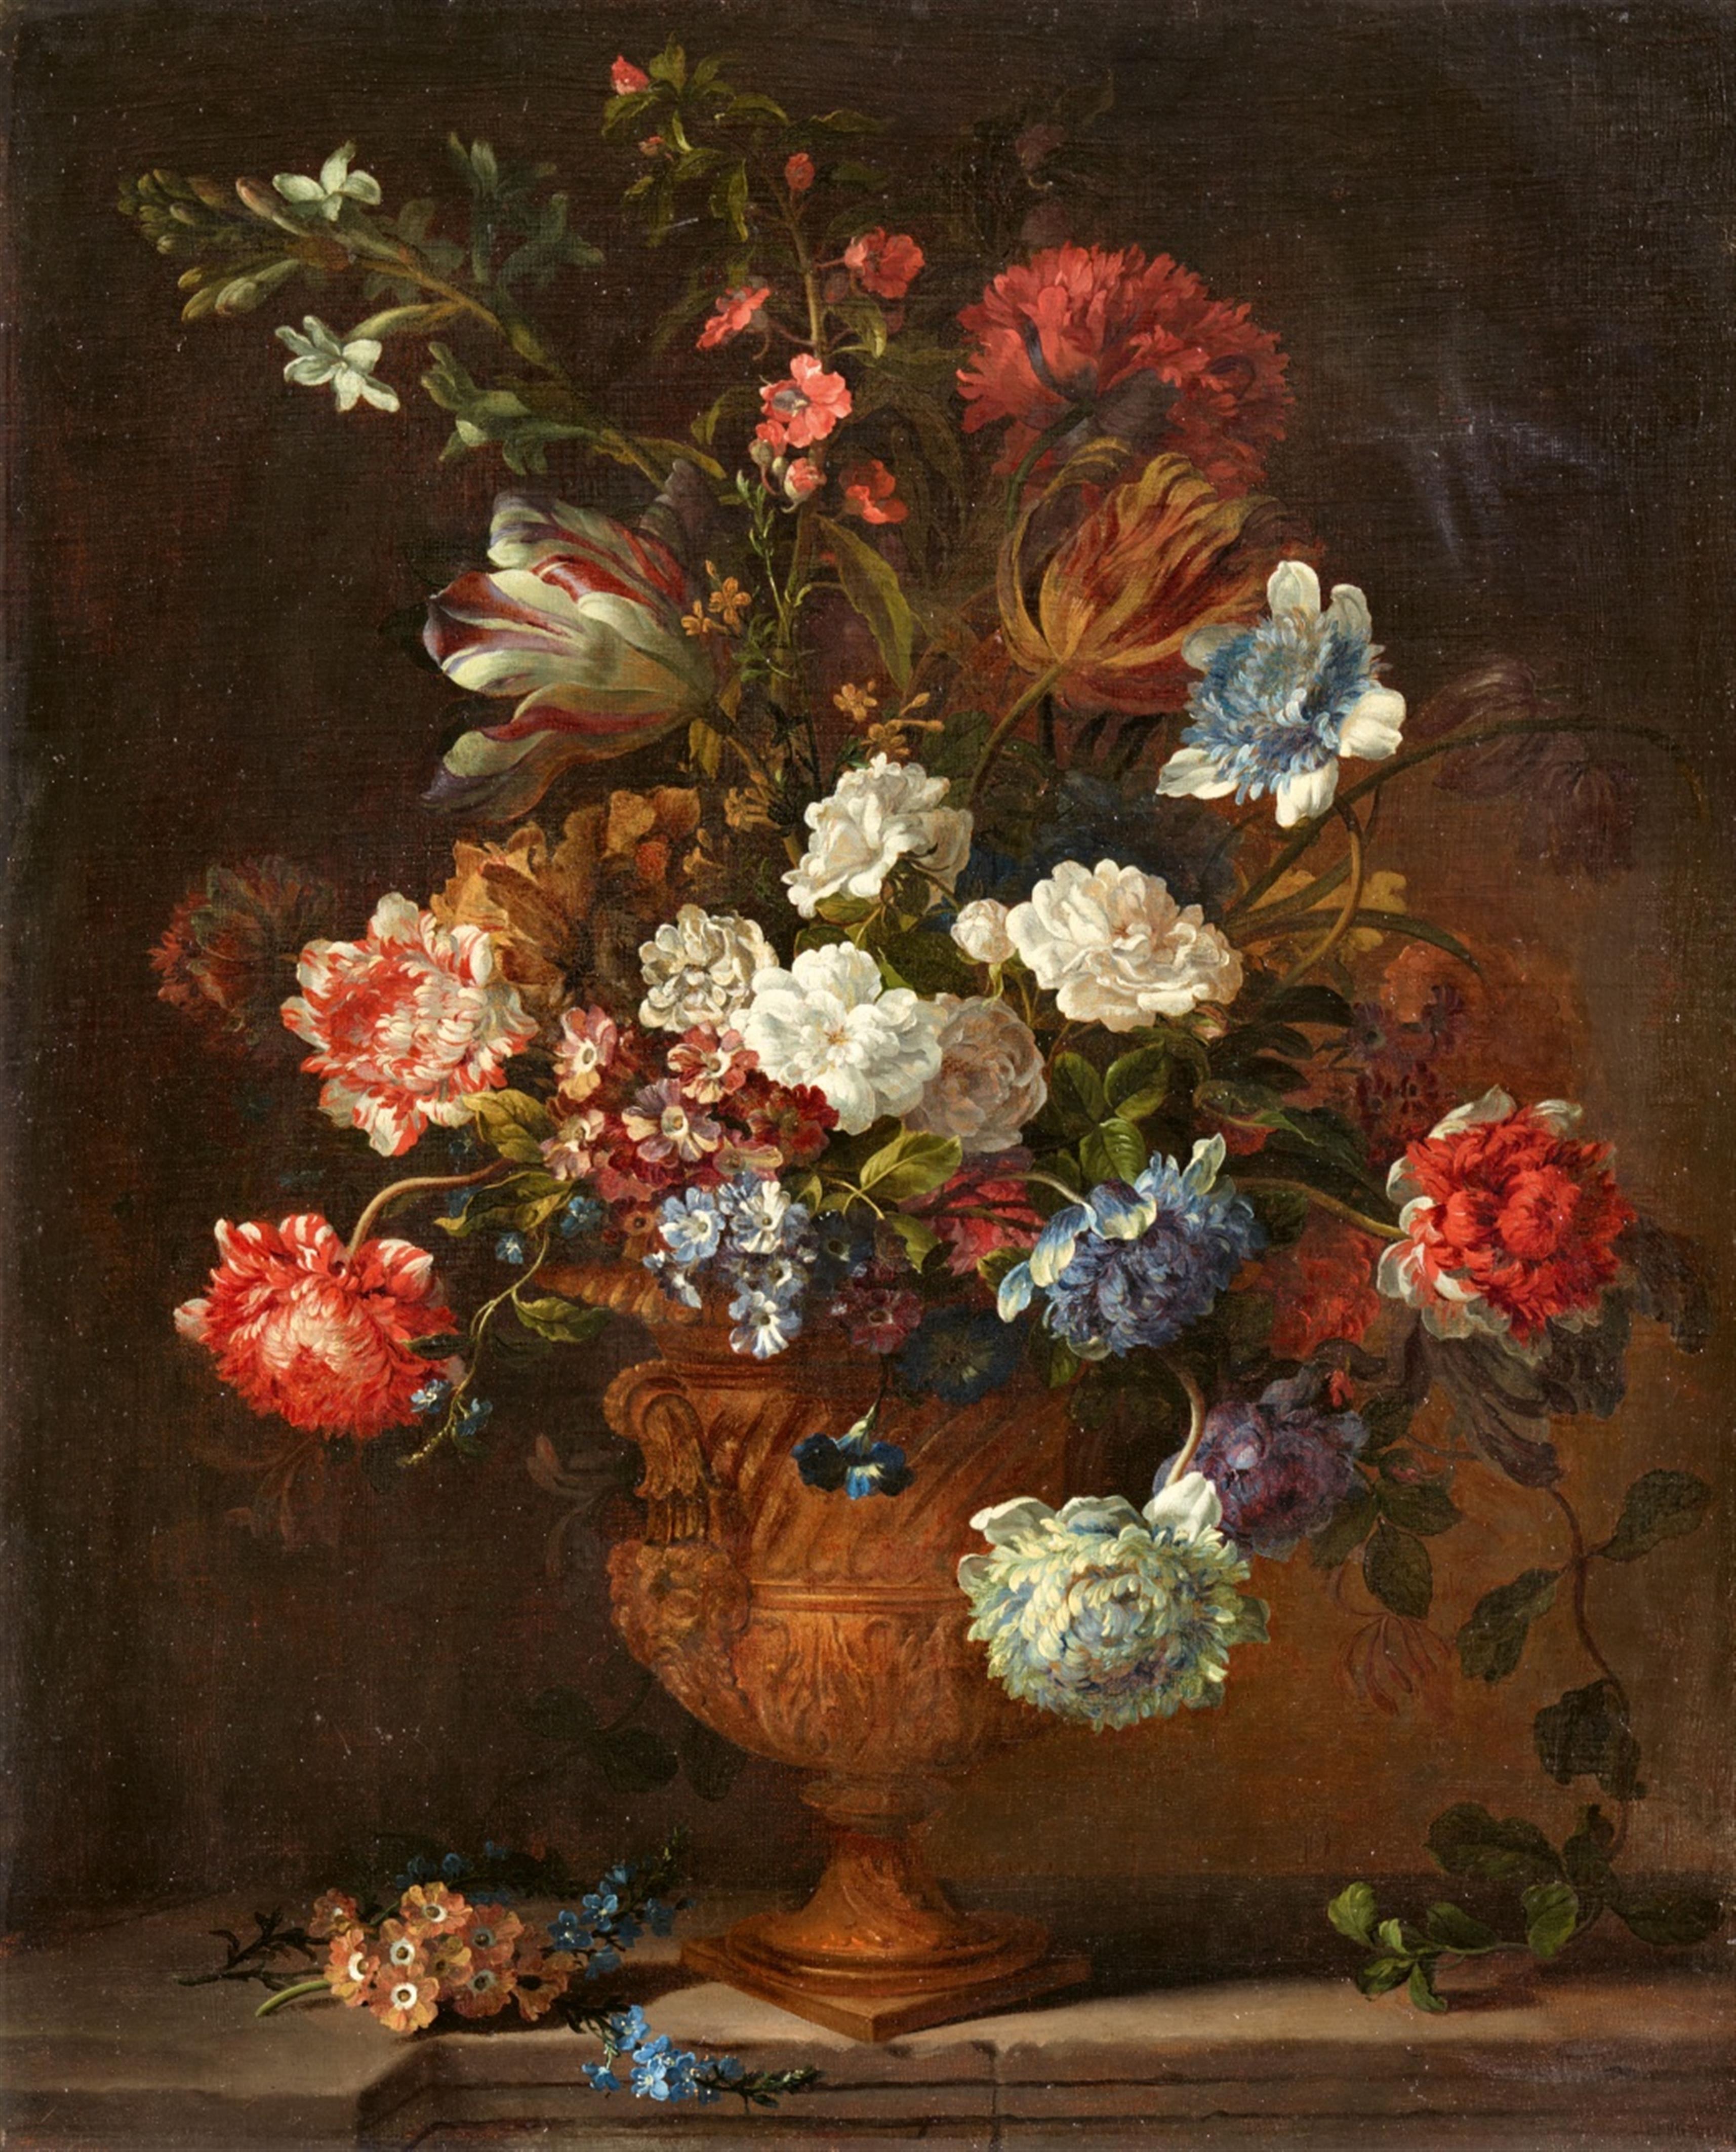 Jean-Baptiste Belin de Fontenay - Still Life with Crysanthemums, Parrot Tulips, and Peonies - image-1